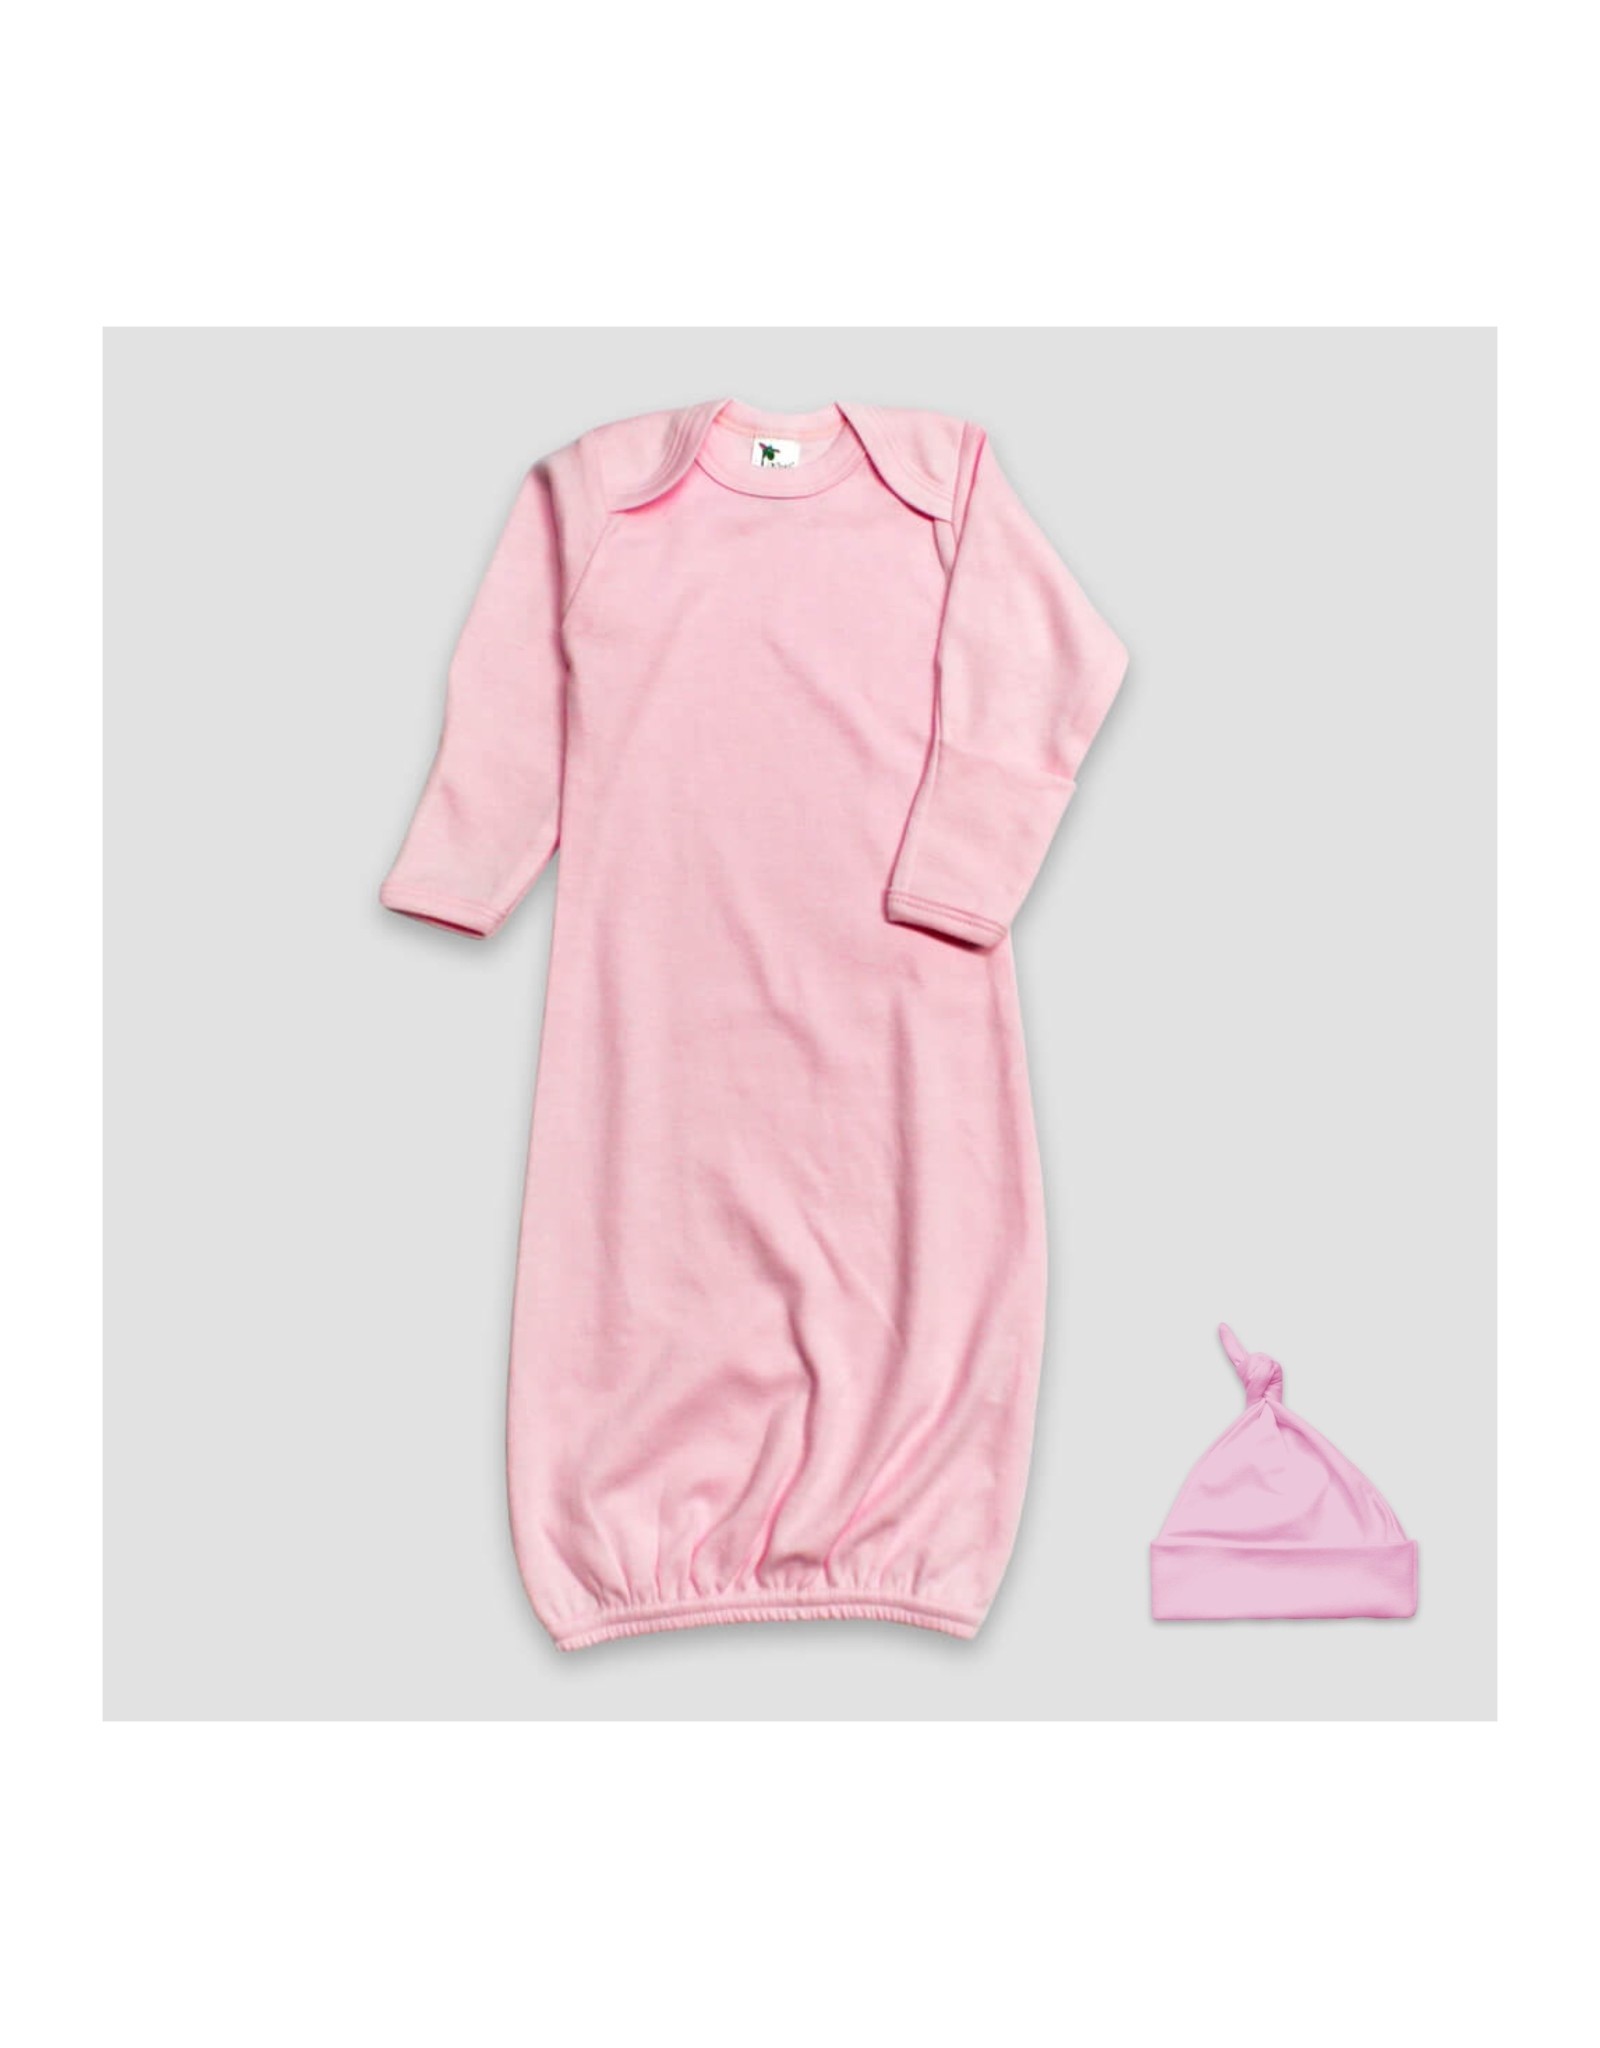 LG-Baby Gown Set w/Hat (Pink) 0-3mth